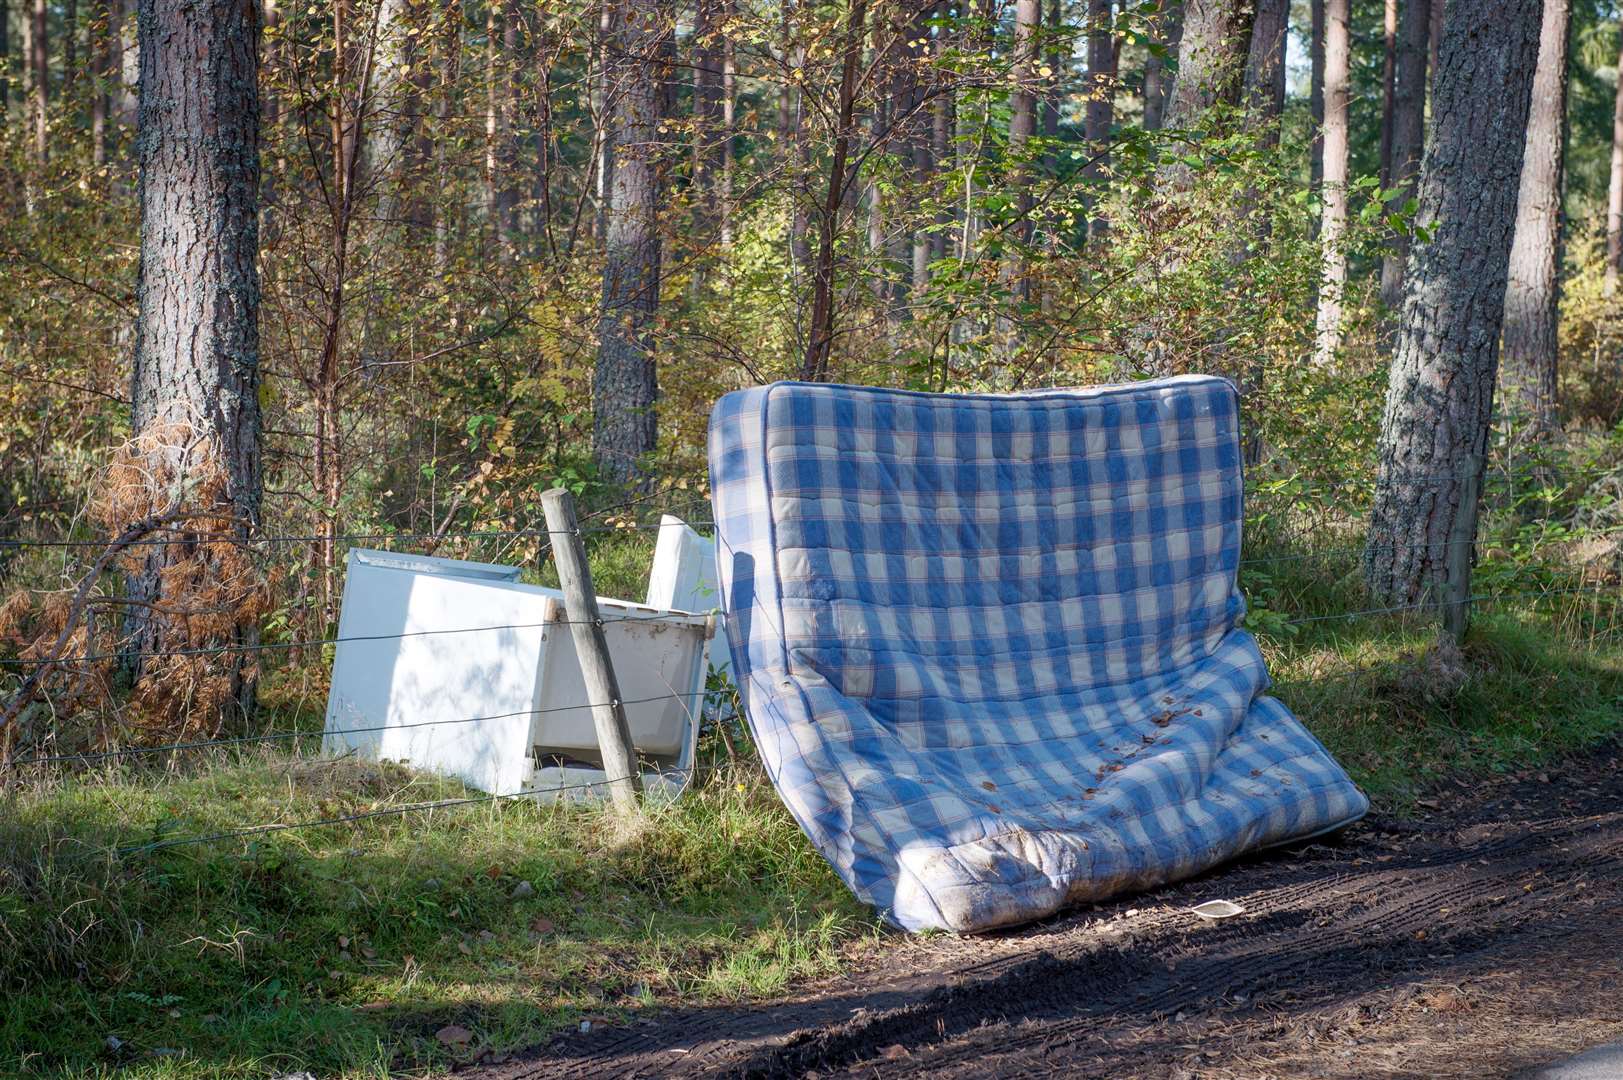 Fly-tipping is one of the results of illegal waste disposal.